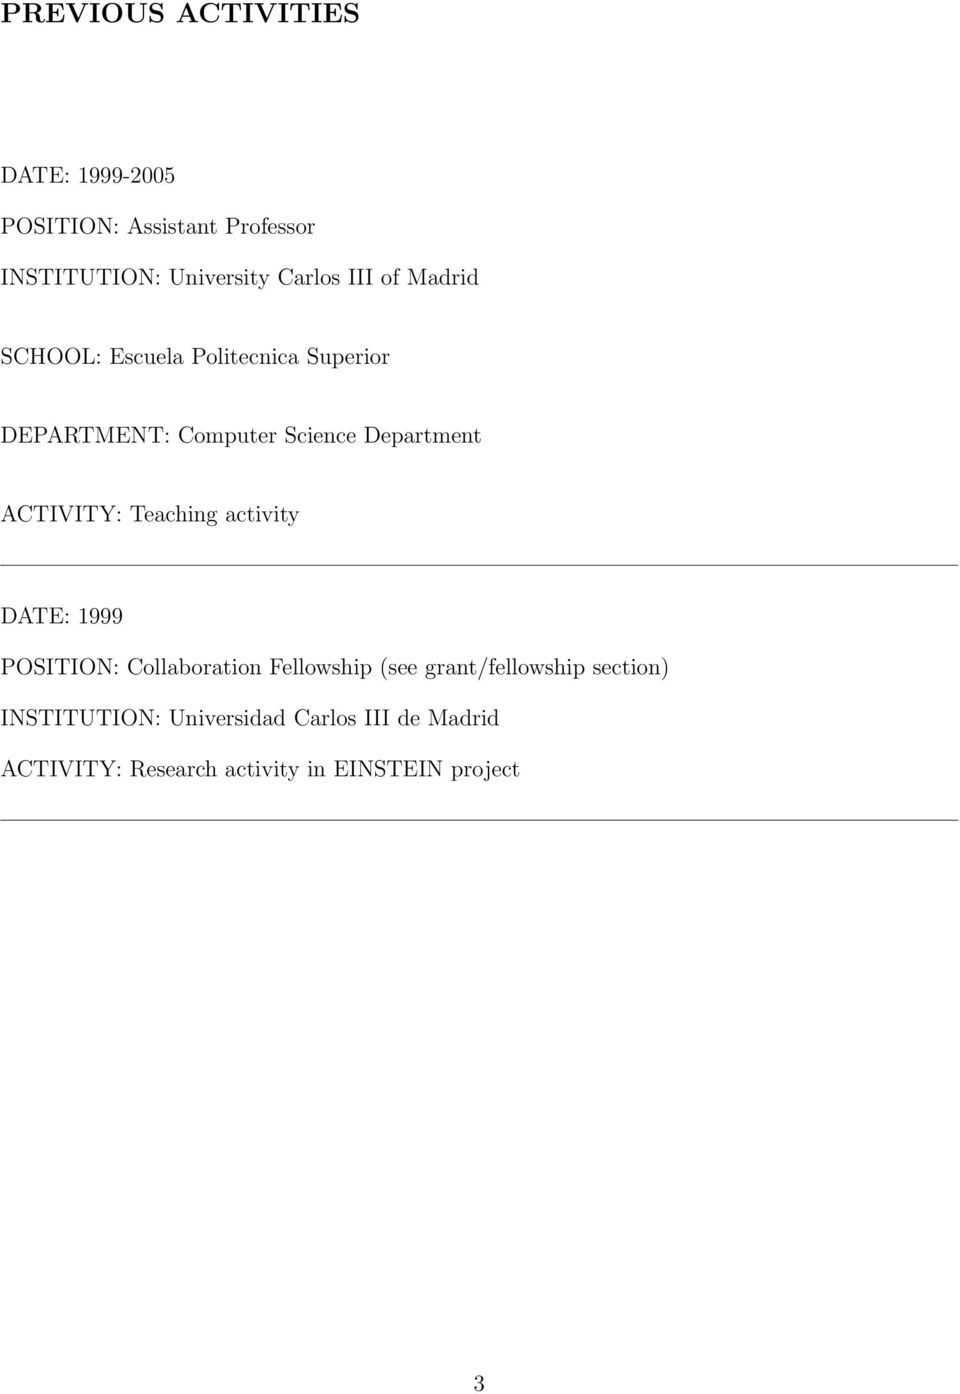 ACTIVITY: Teaching activity DATE: 1999 POSITION: Collaboration Fellowship (see grant/fellowship